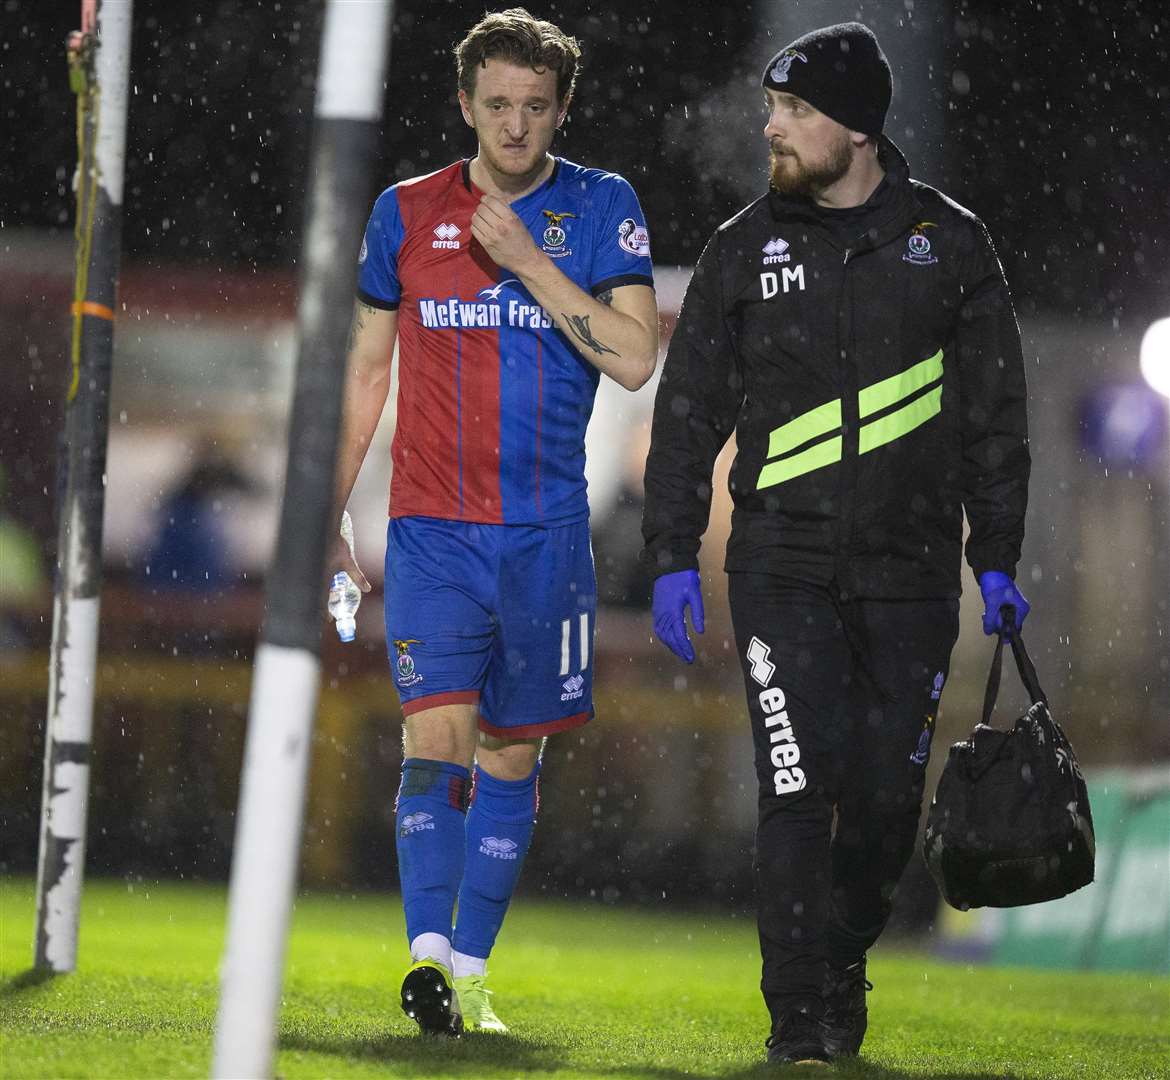 Tom Walsh forced to come off injured with an early injury against Ross County in the Scottish Cup.